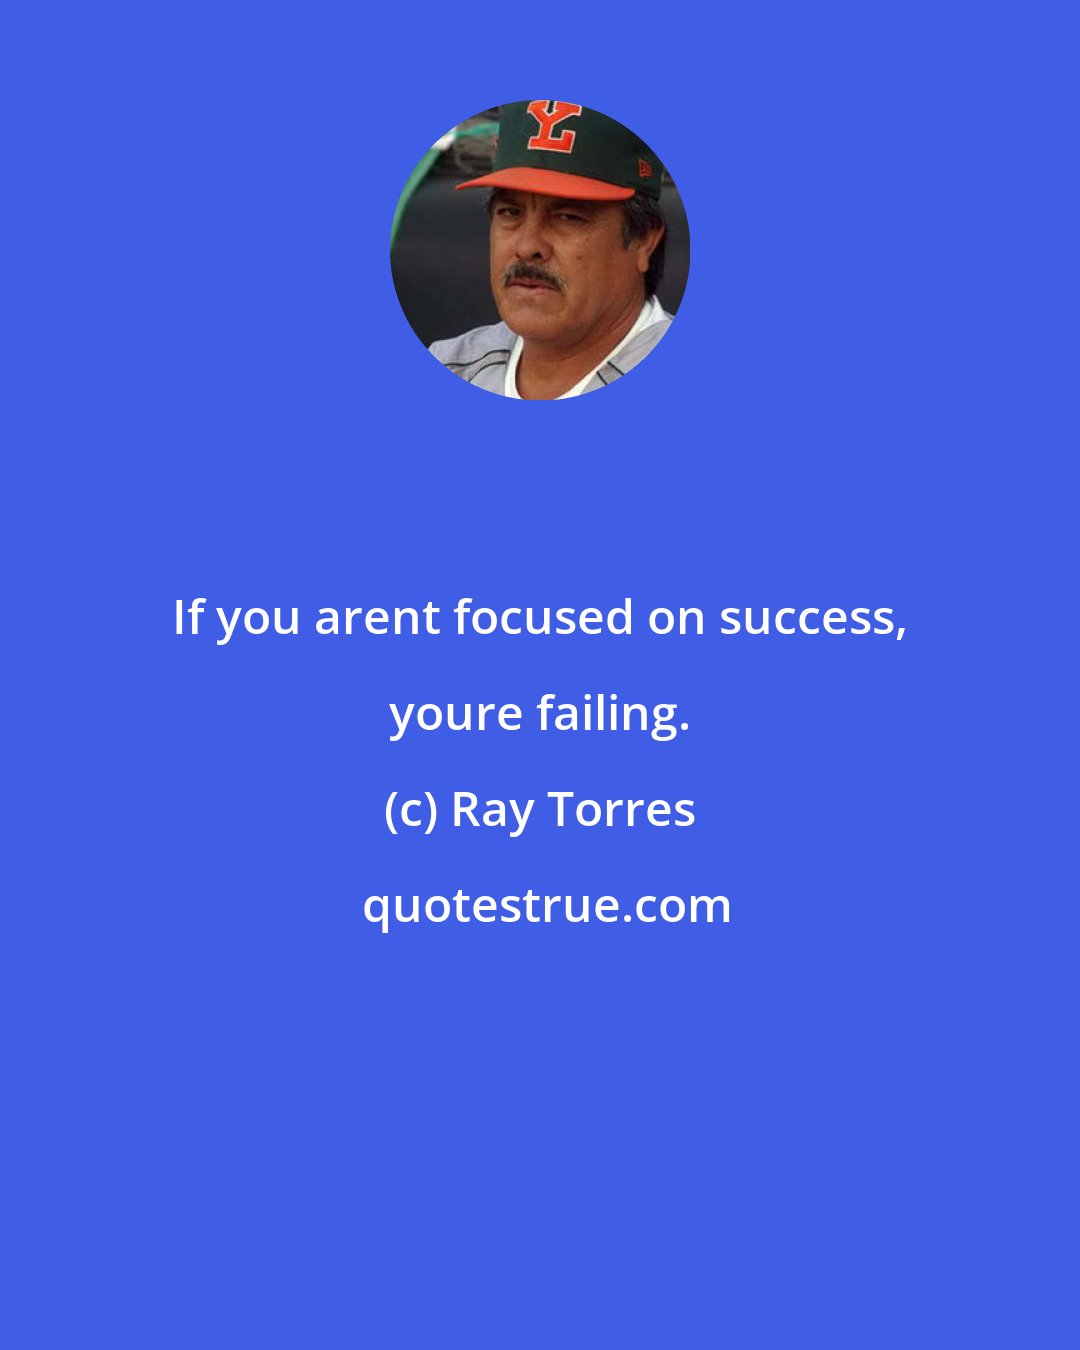 Ray Torres: If you arent focused on success, youre failing.